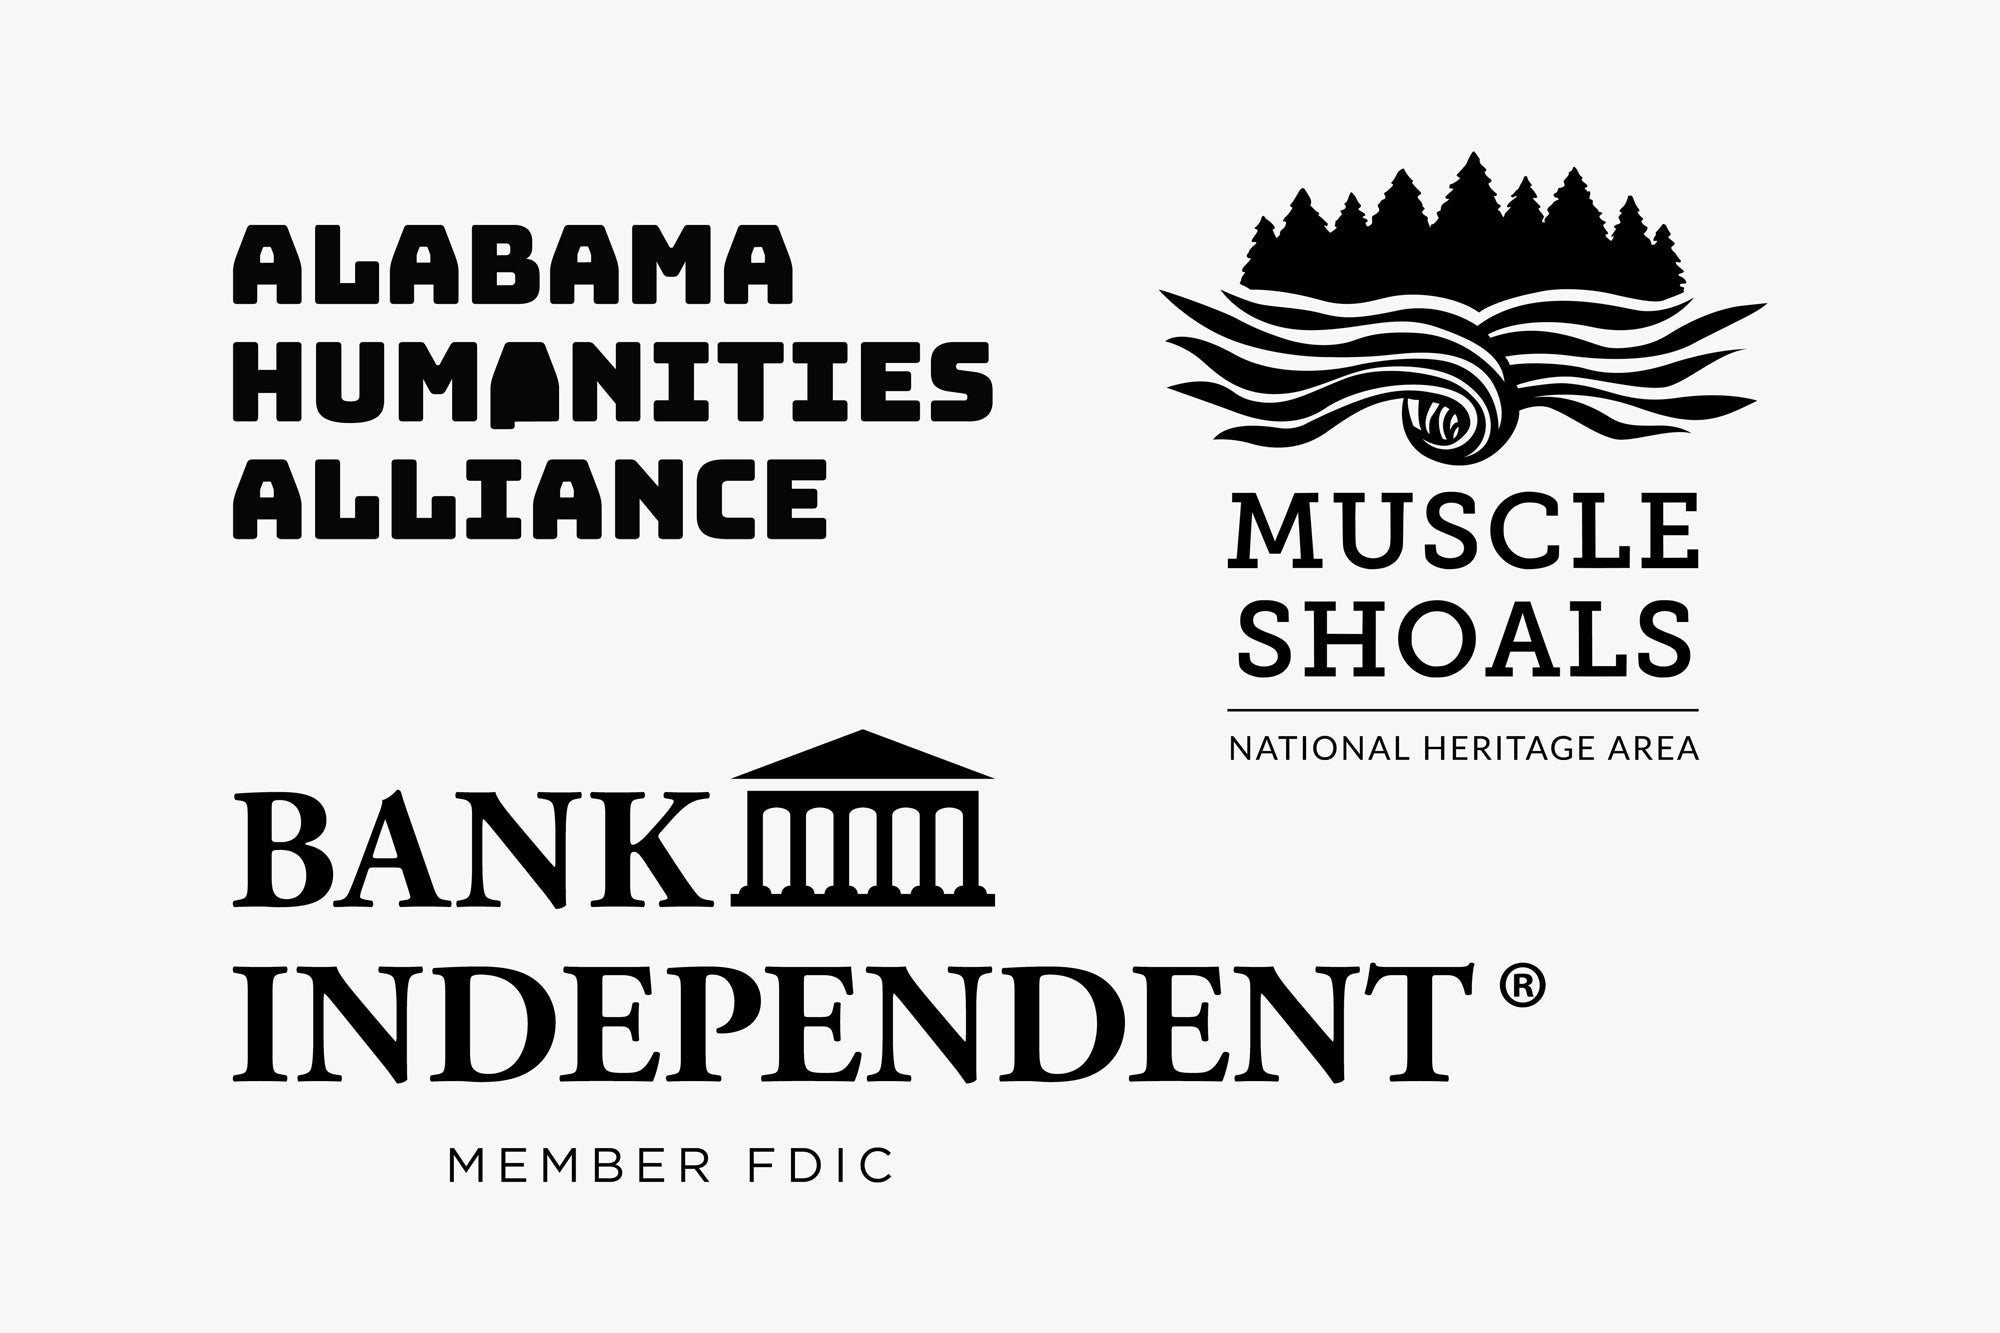 Logos for Alabama Humanities Alliance, Muscle Shoals National Heritage Area, and Bank Independent.